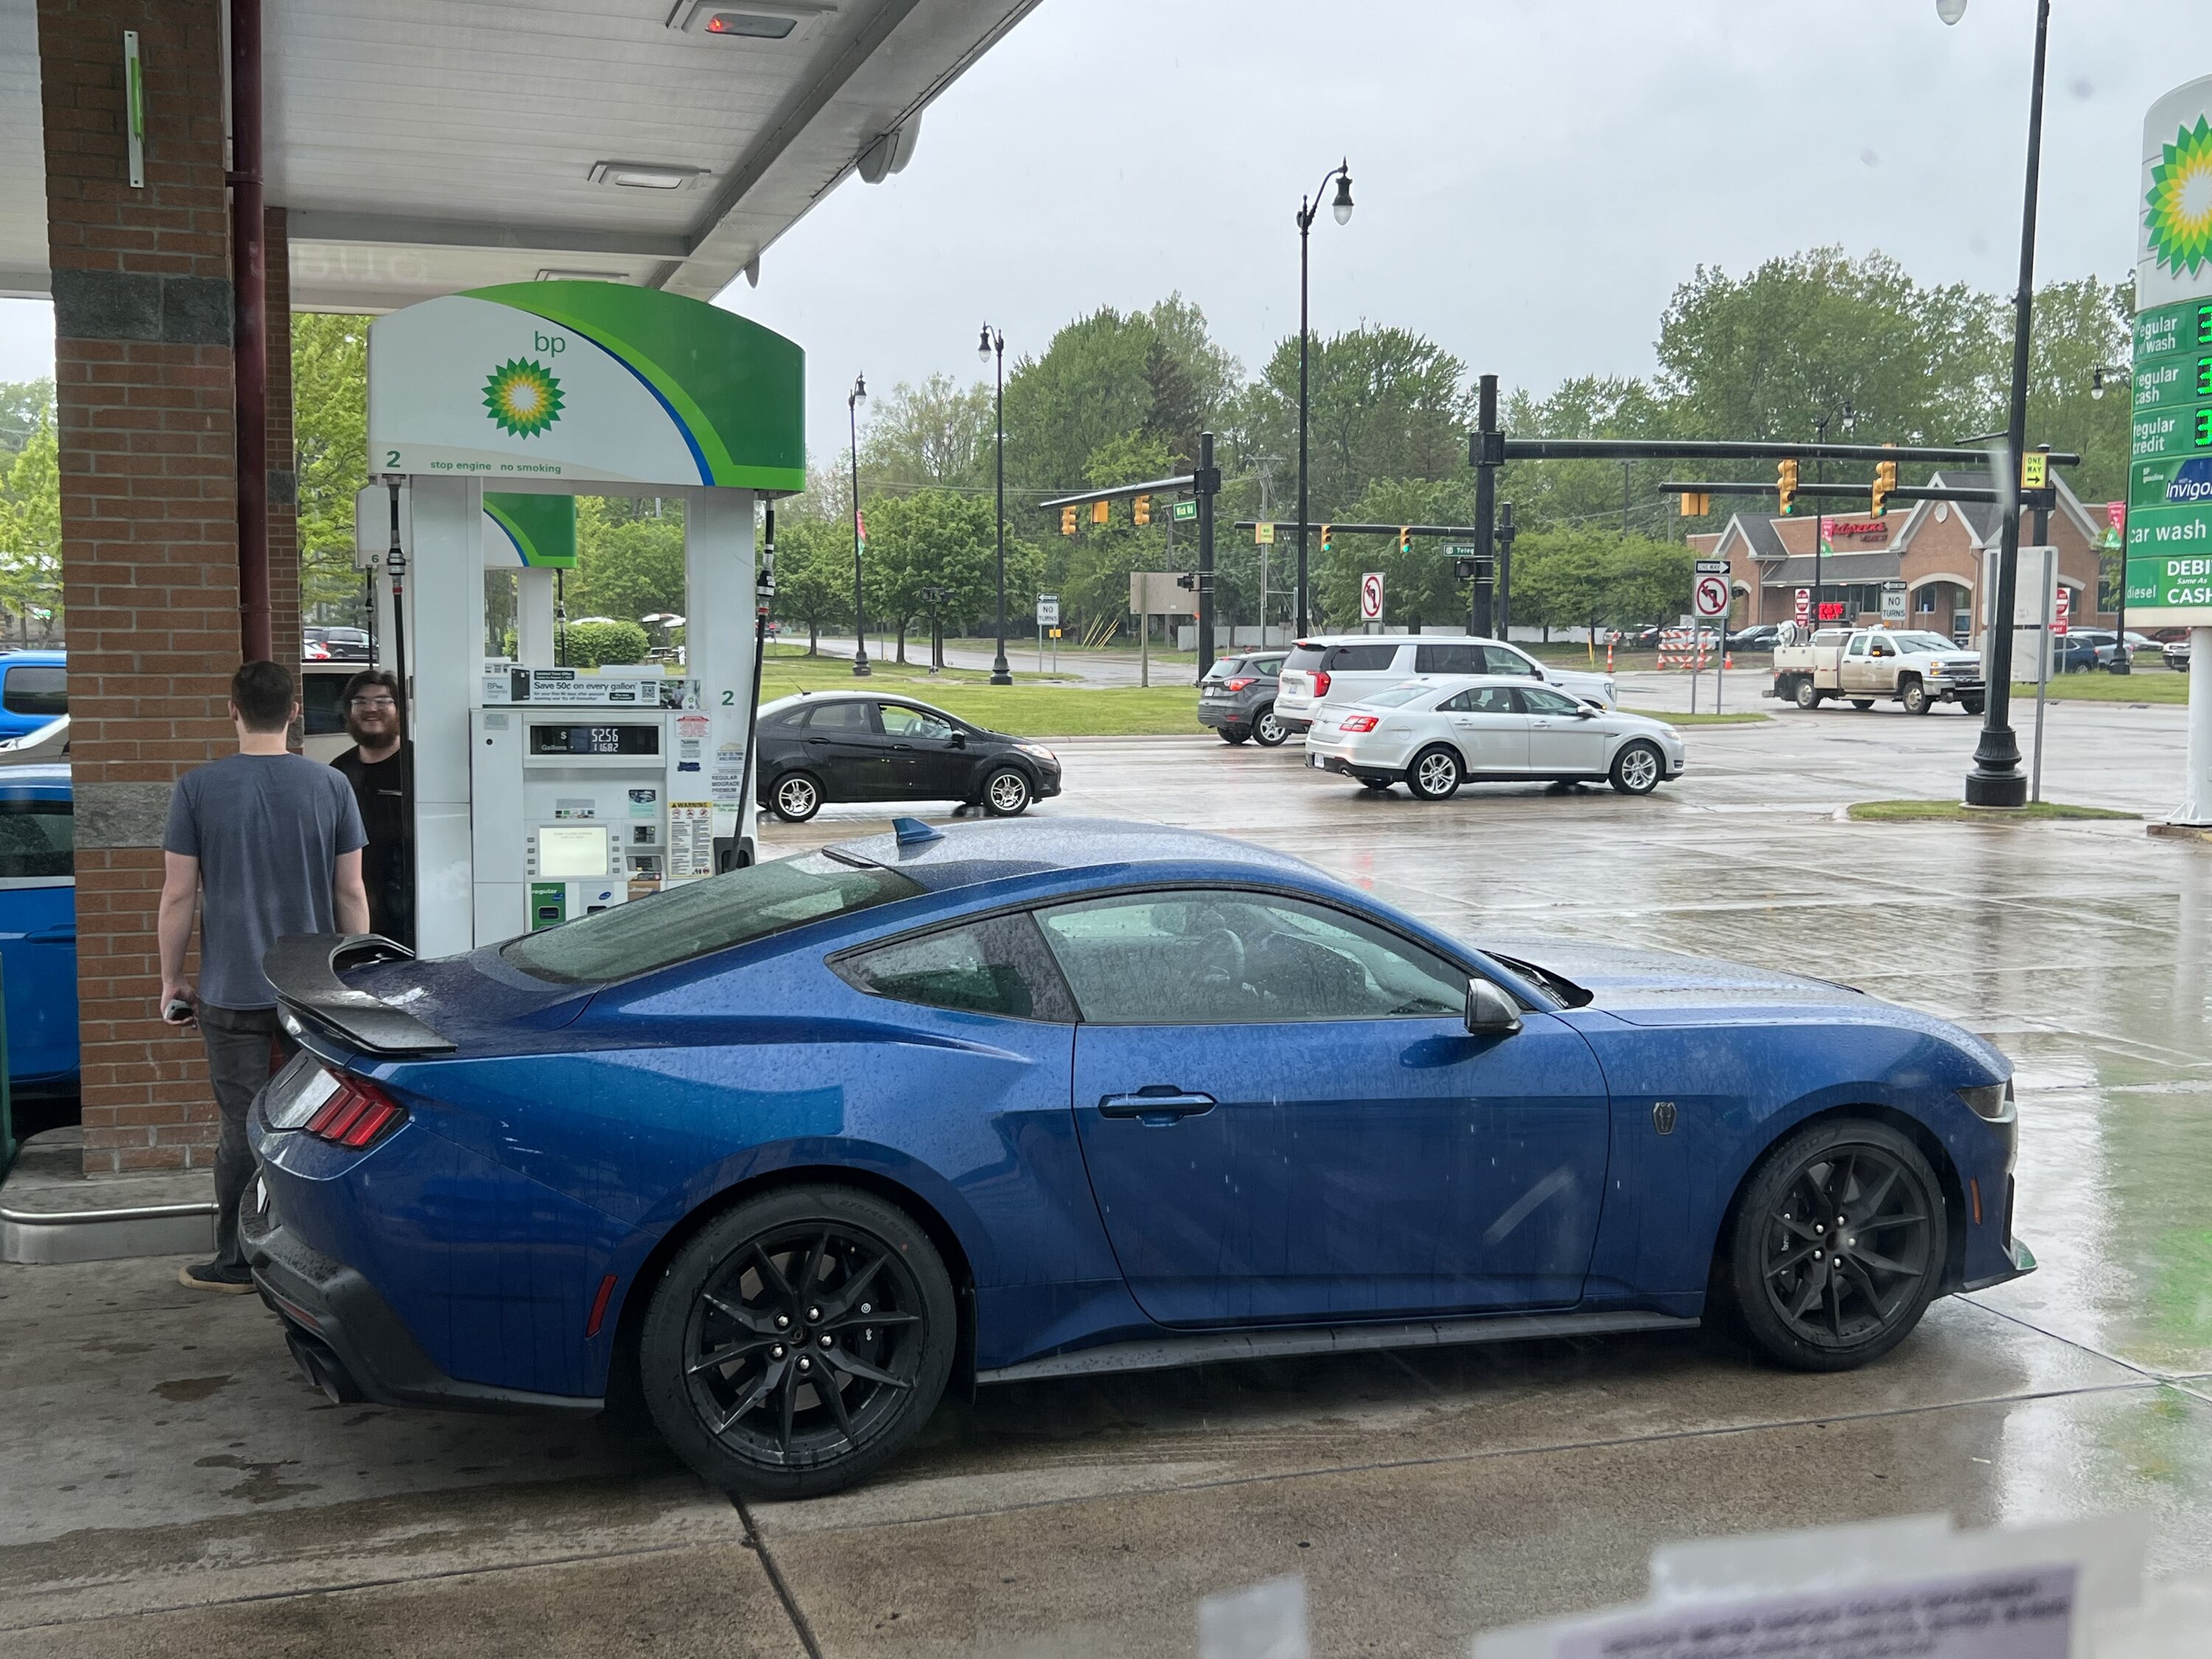 S650 Mustang New Ford Mustang picture video spotted thread! IMG_1033